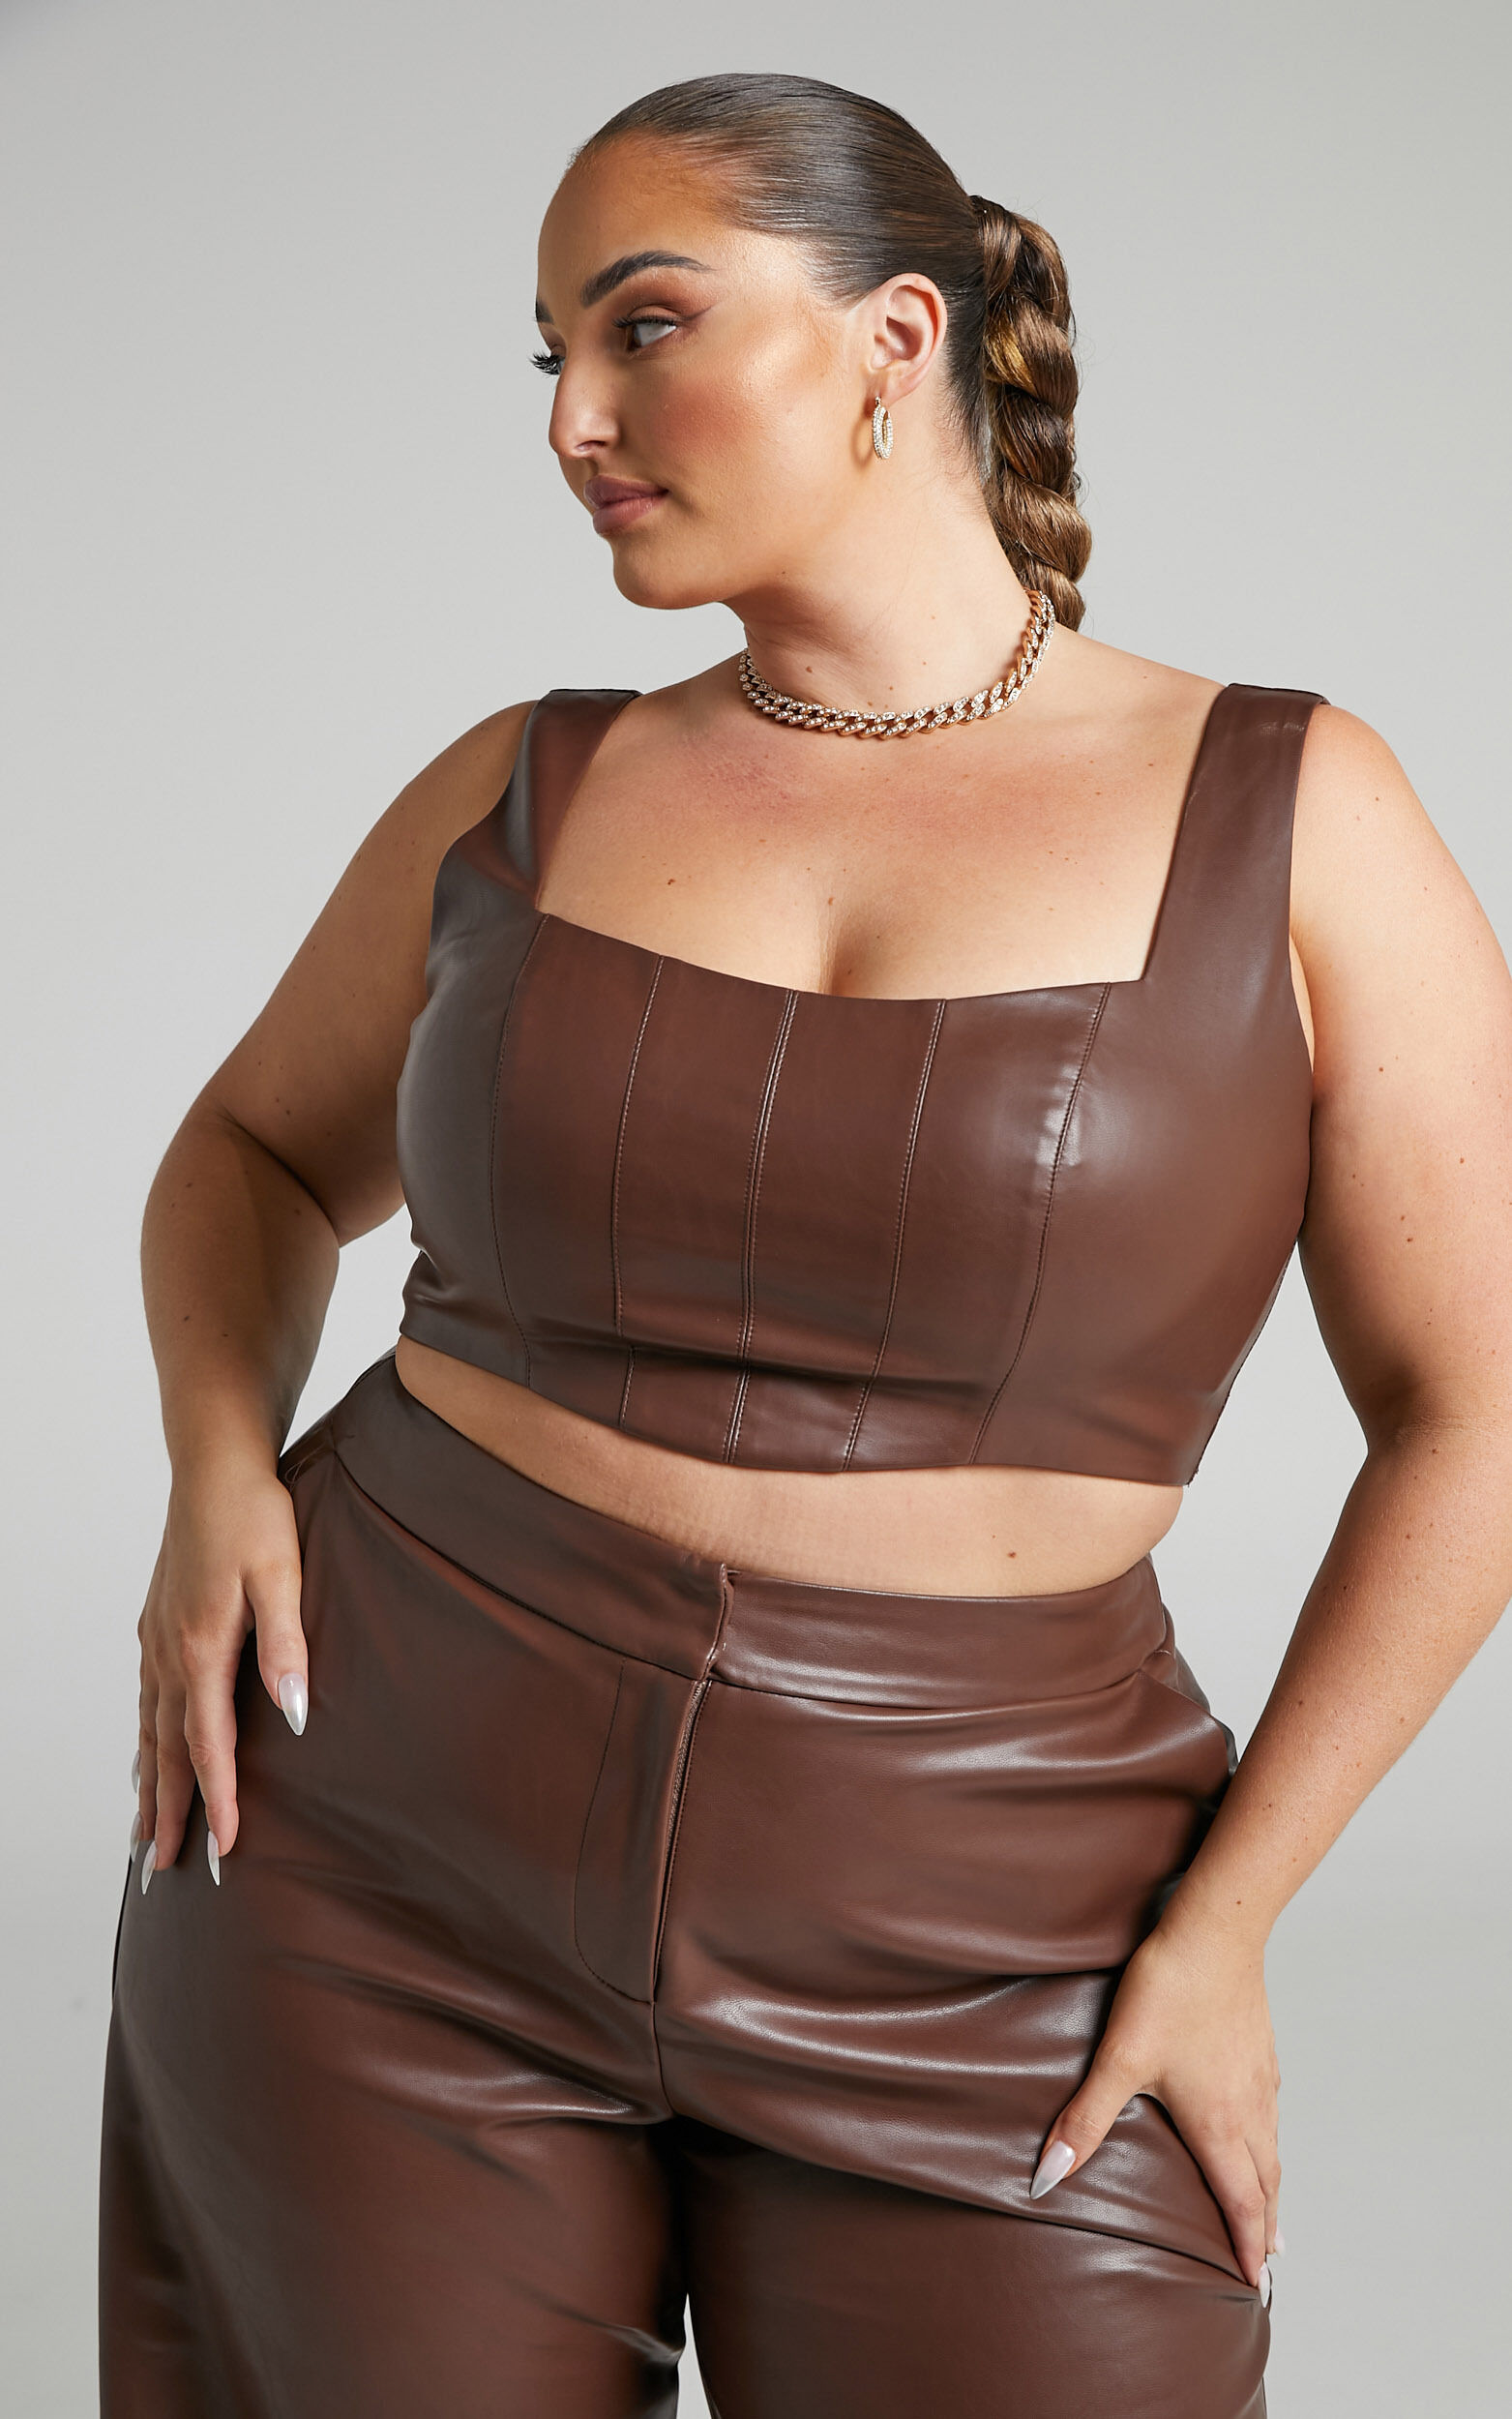 Minx Top - Faux Leather Corset Top in Chocolate